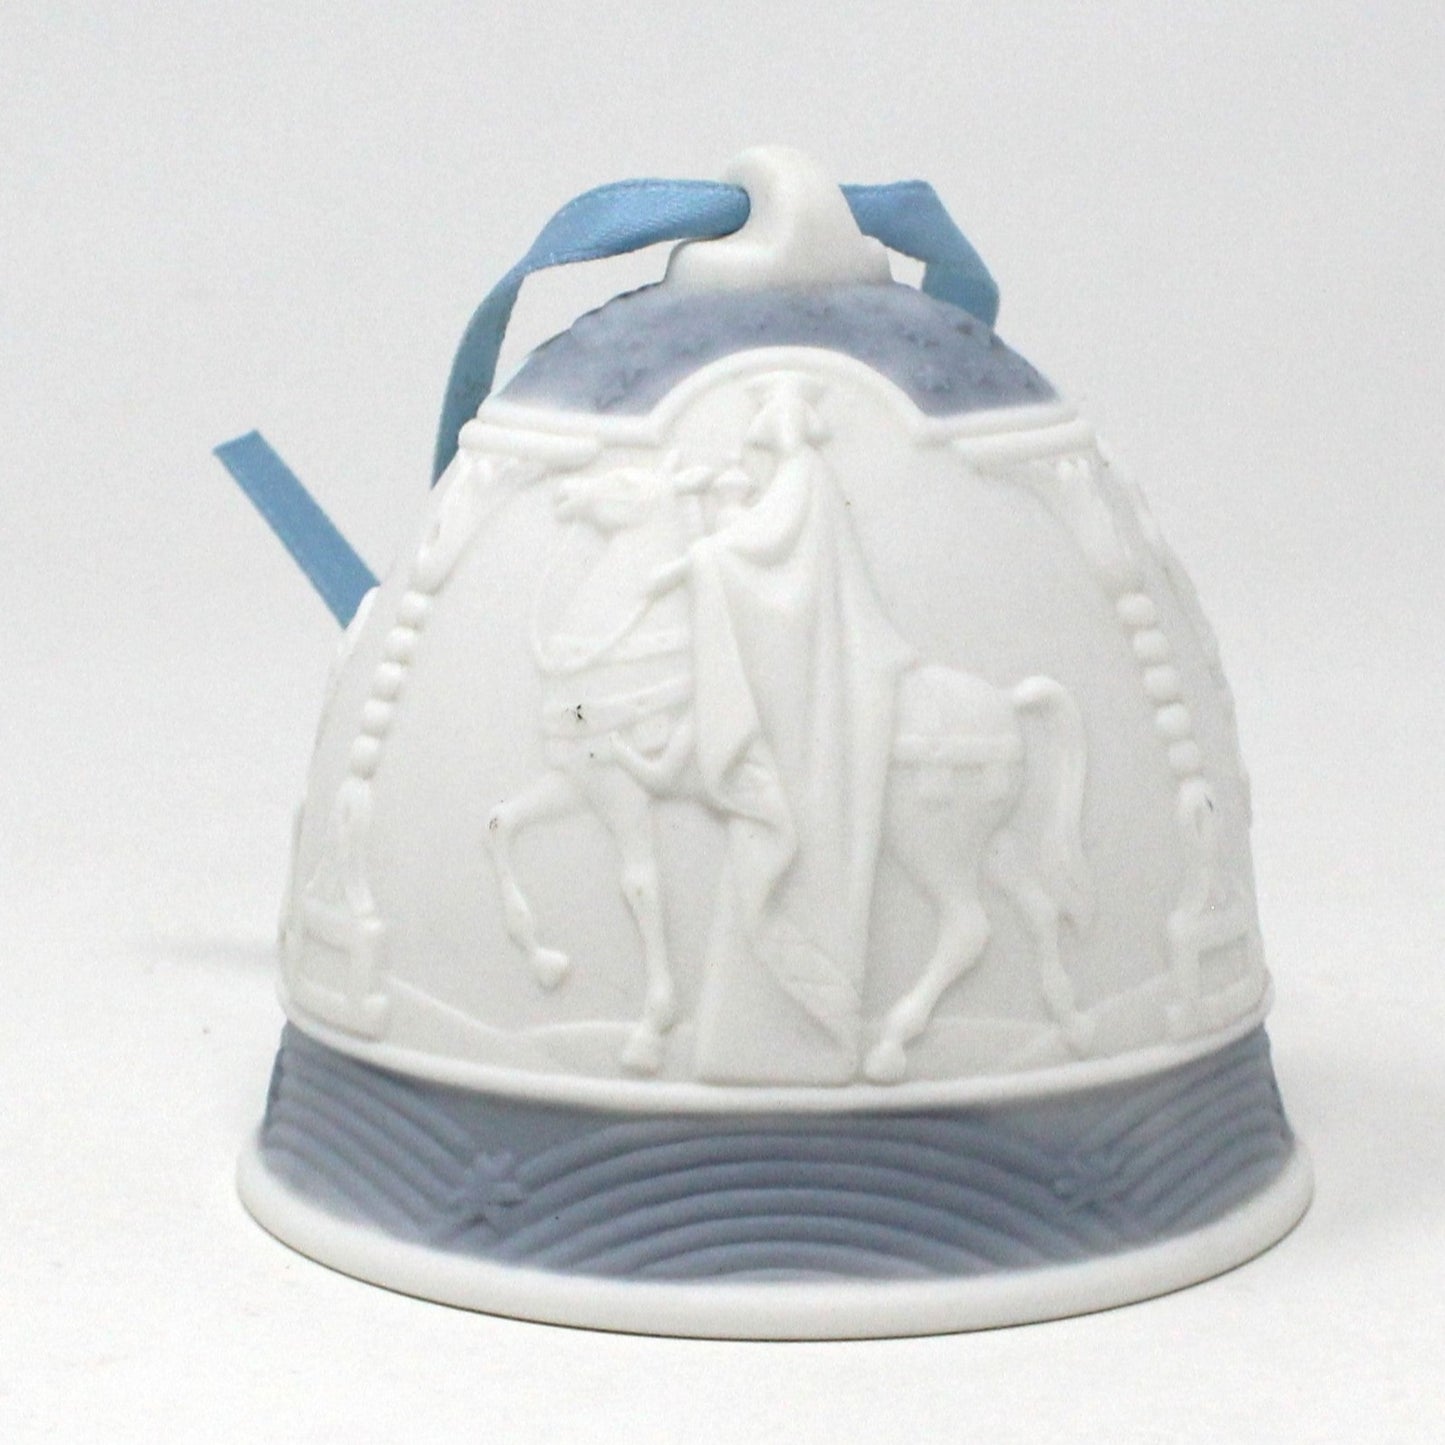 Ornament, Lladro, Annual Christmas Bell, Blue 1990, Porcelain, Vintage, SOLD